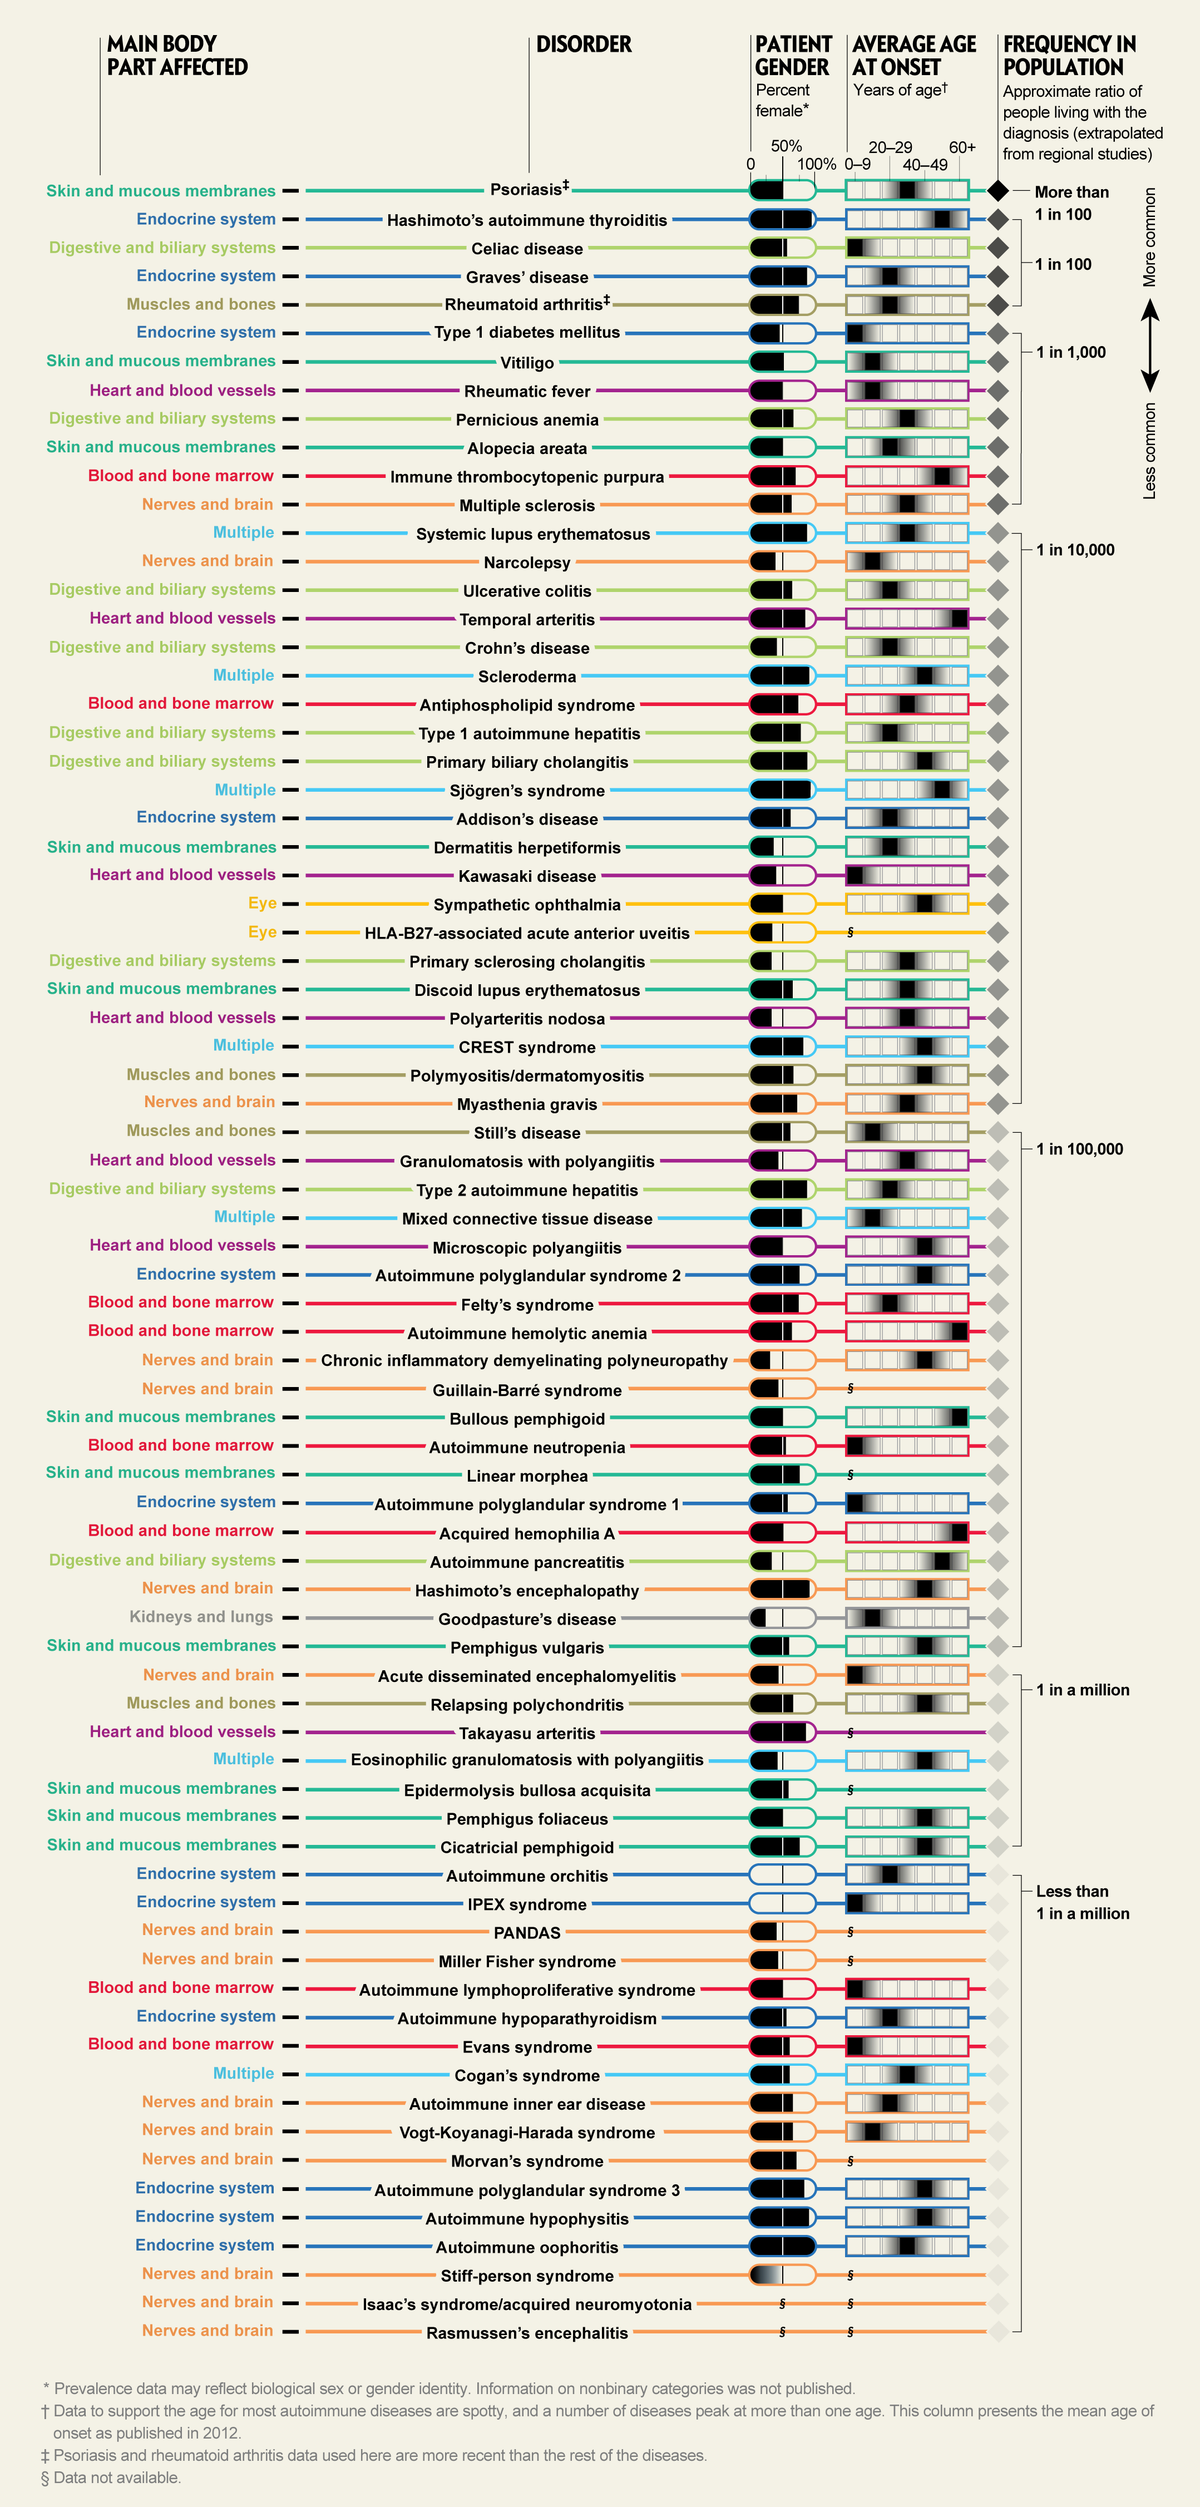 Graphic lists information about 76 autoimmune diseases including main body part affected and frequency in population.